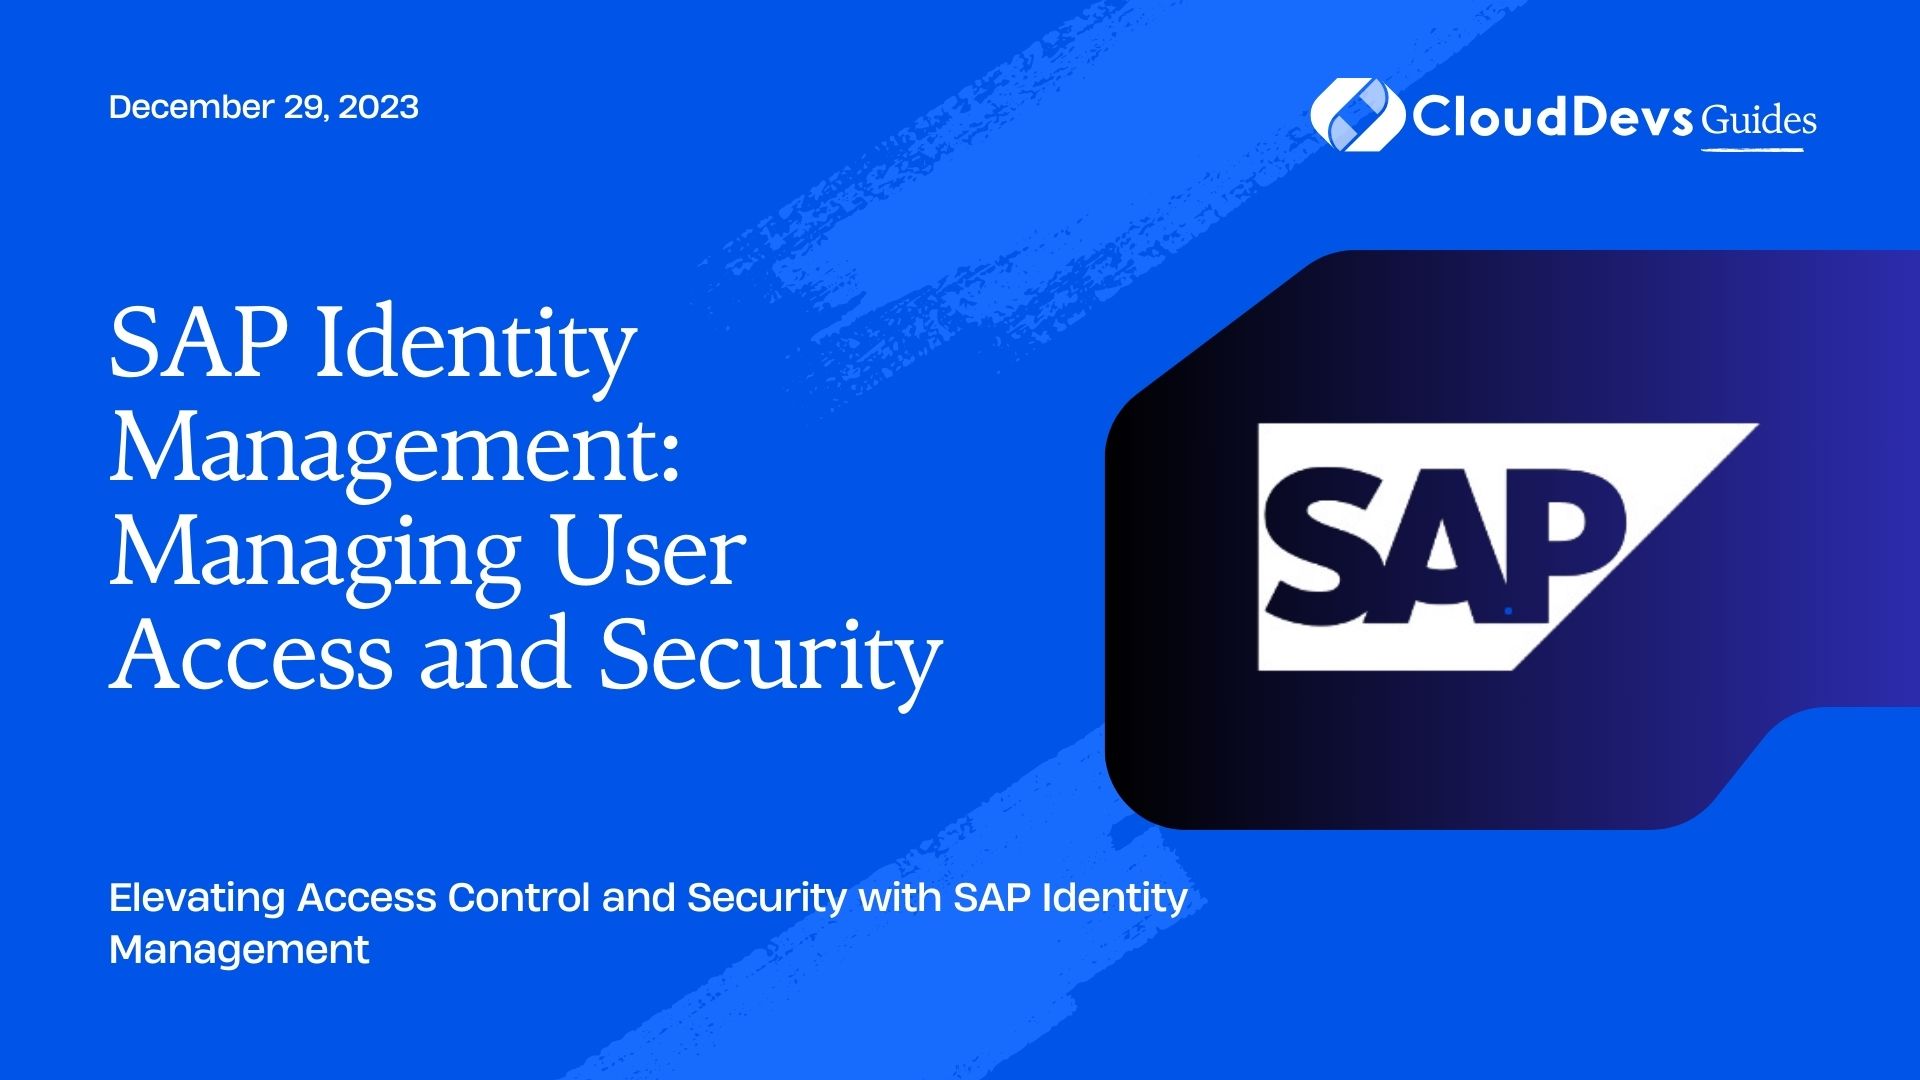 SAP Identity Management: Managing User Access and Security